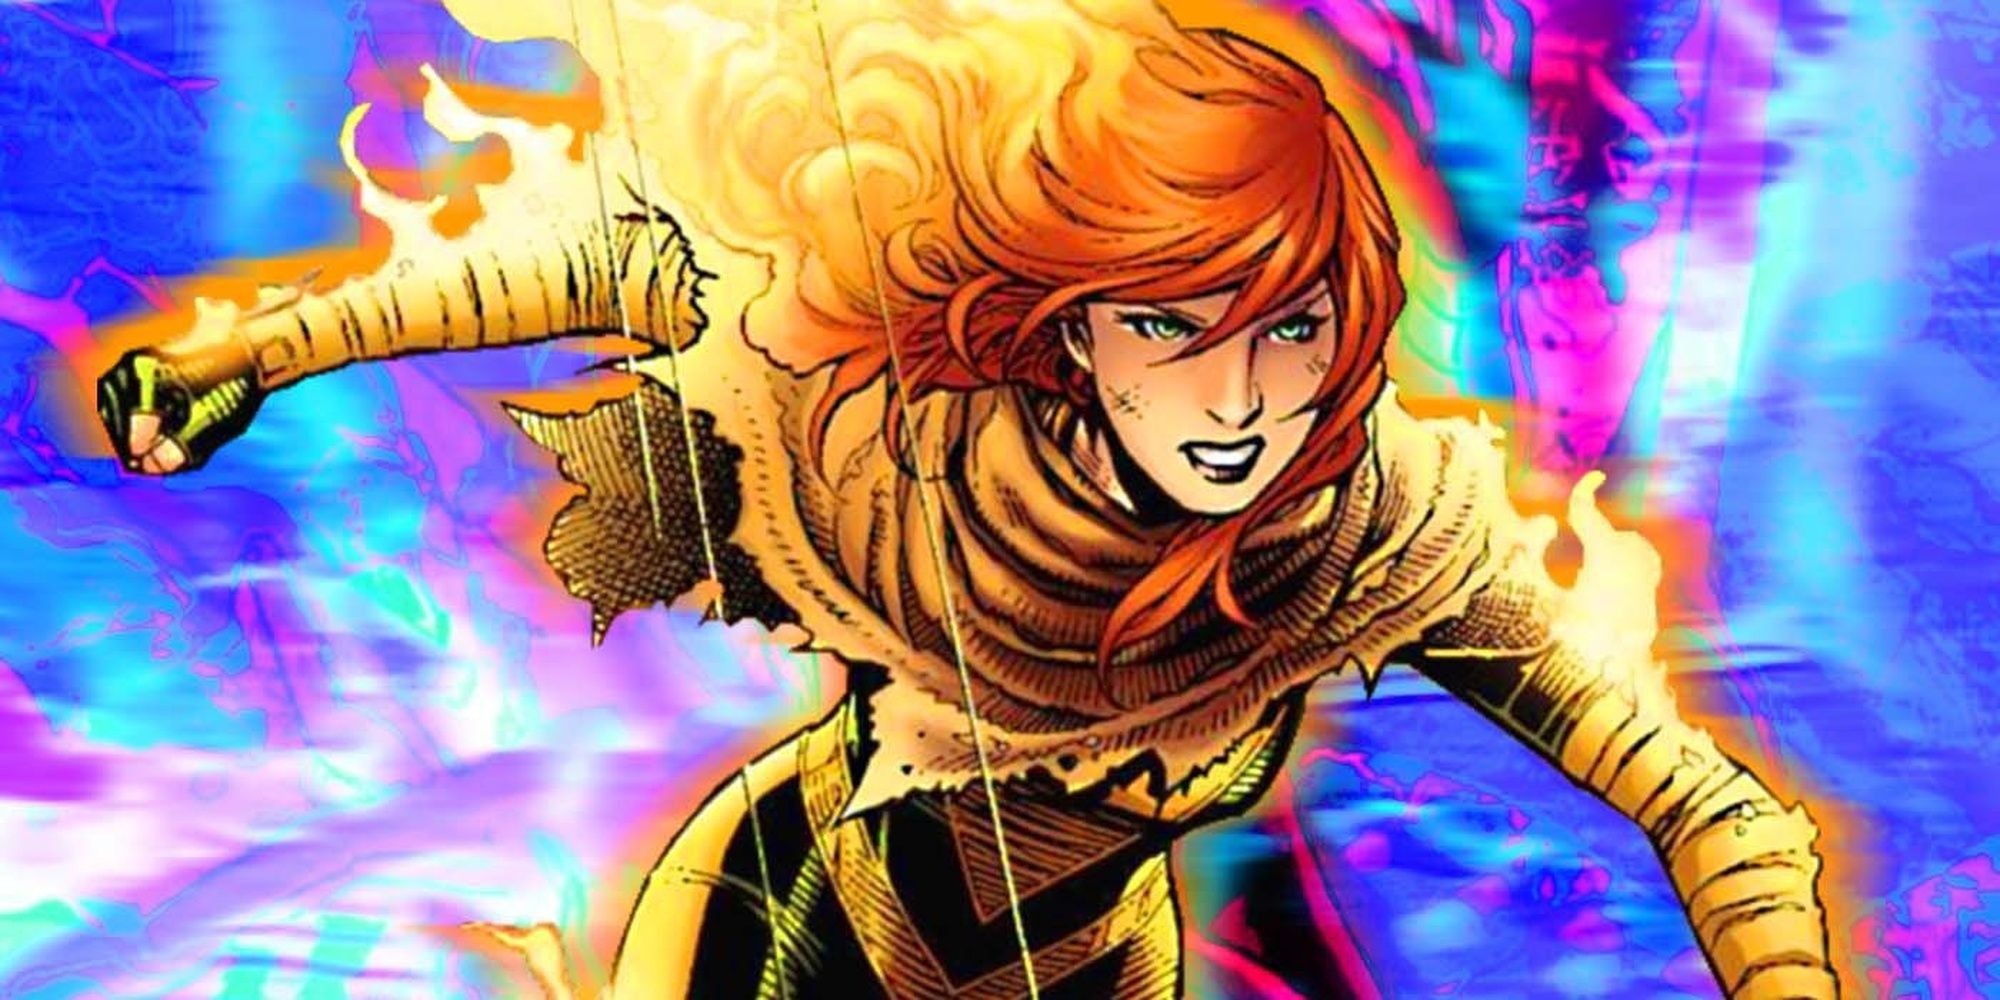 Marvel Comics' Hope Summers using her powers against a bright background